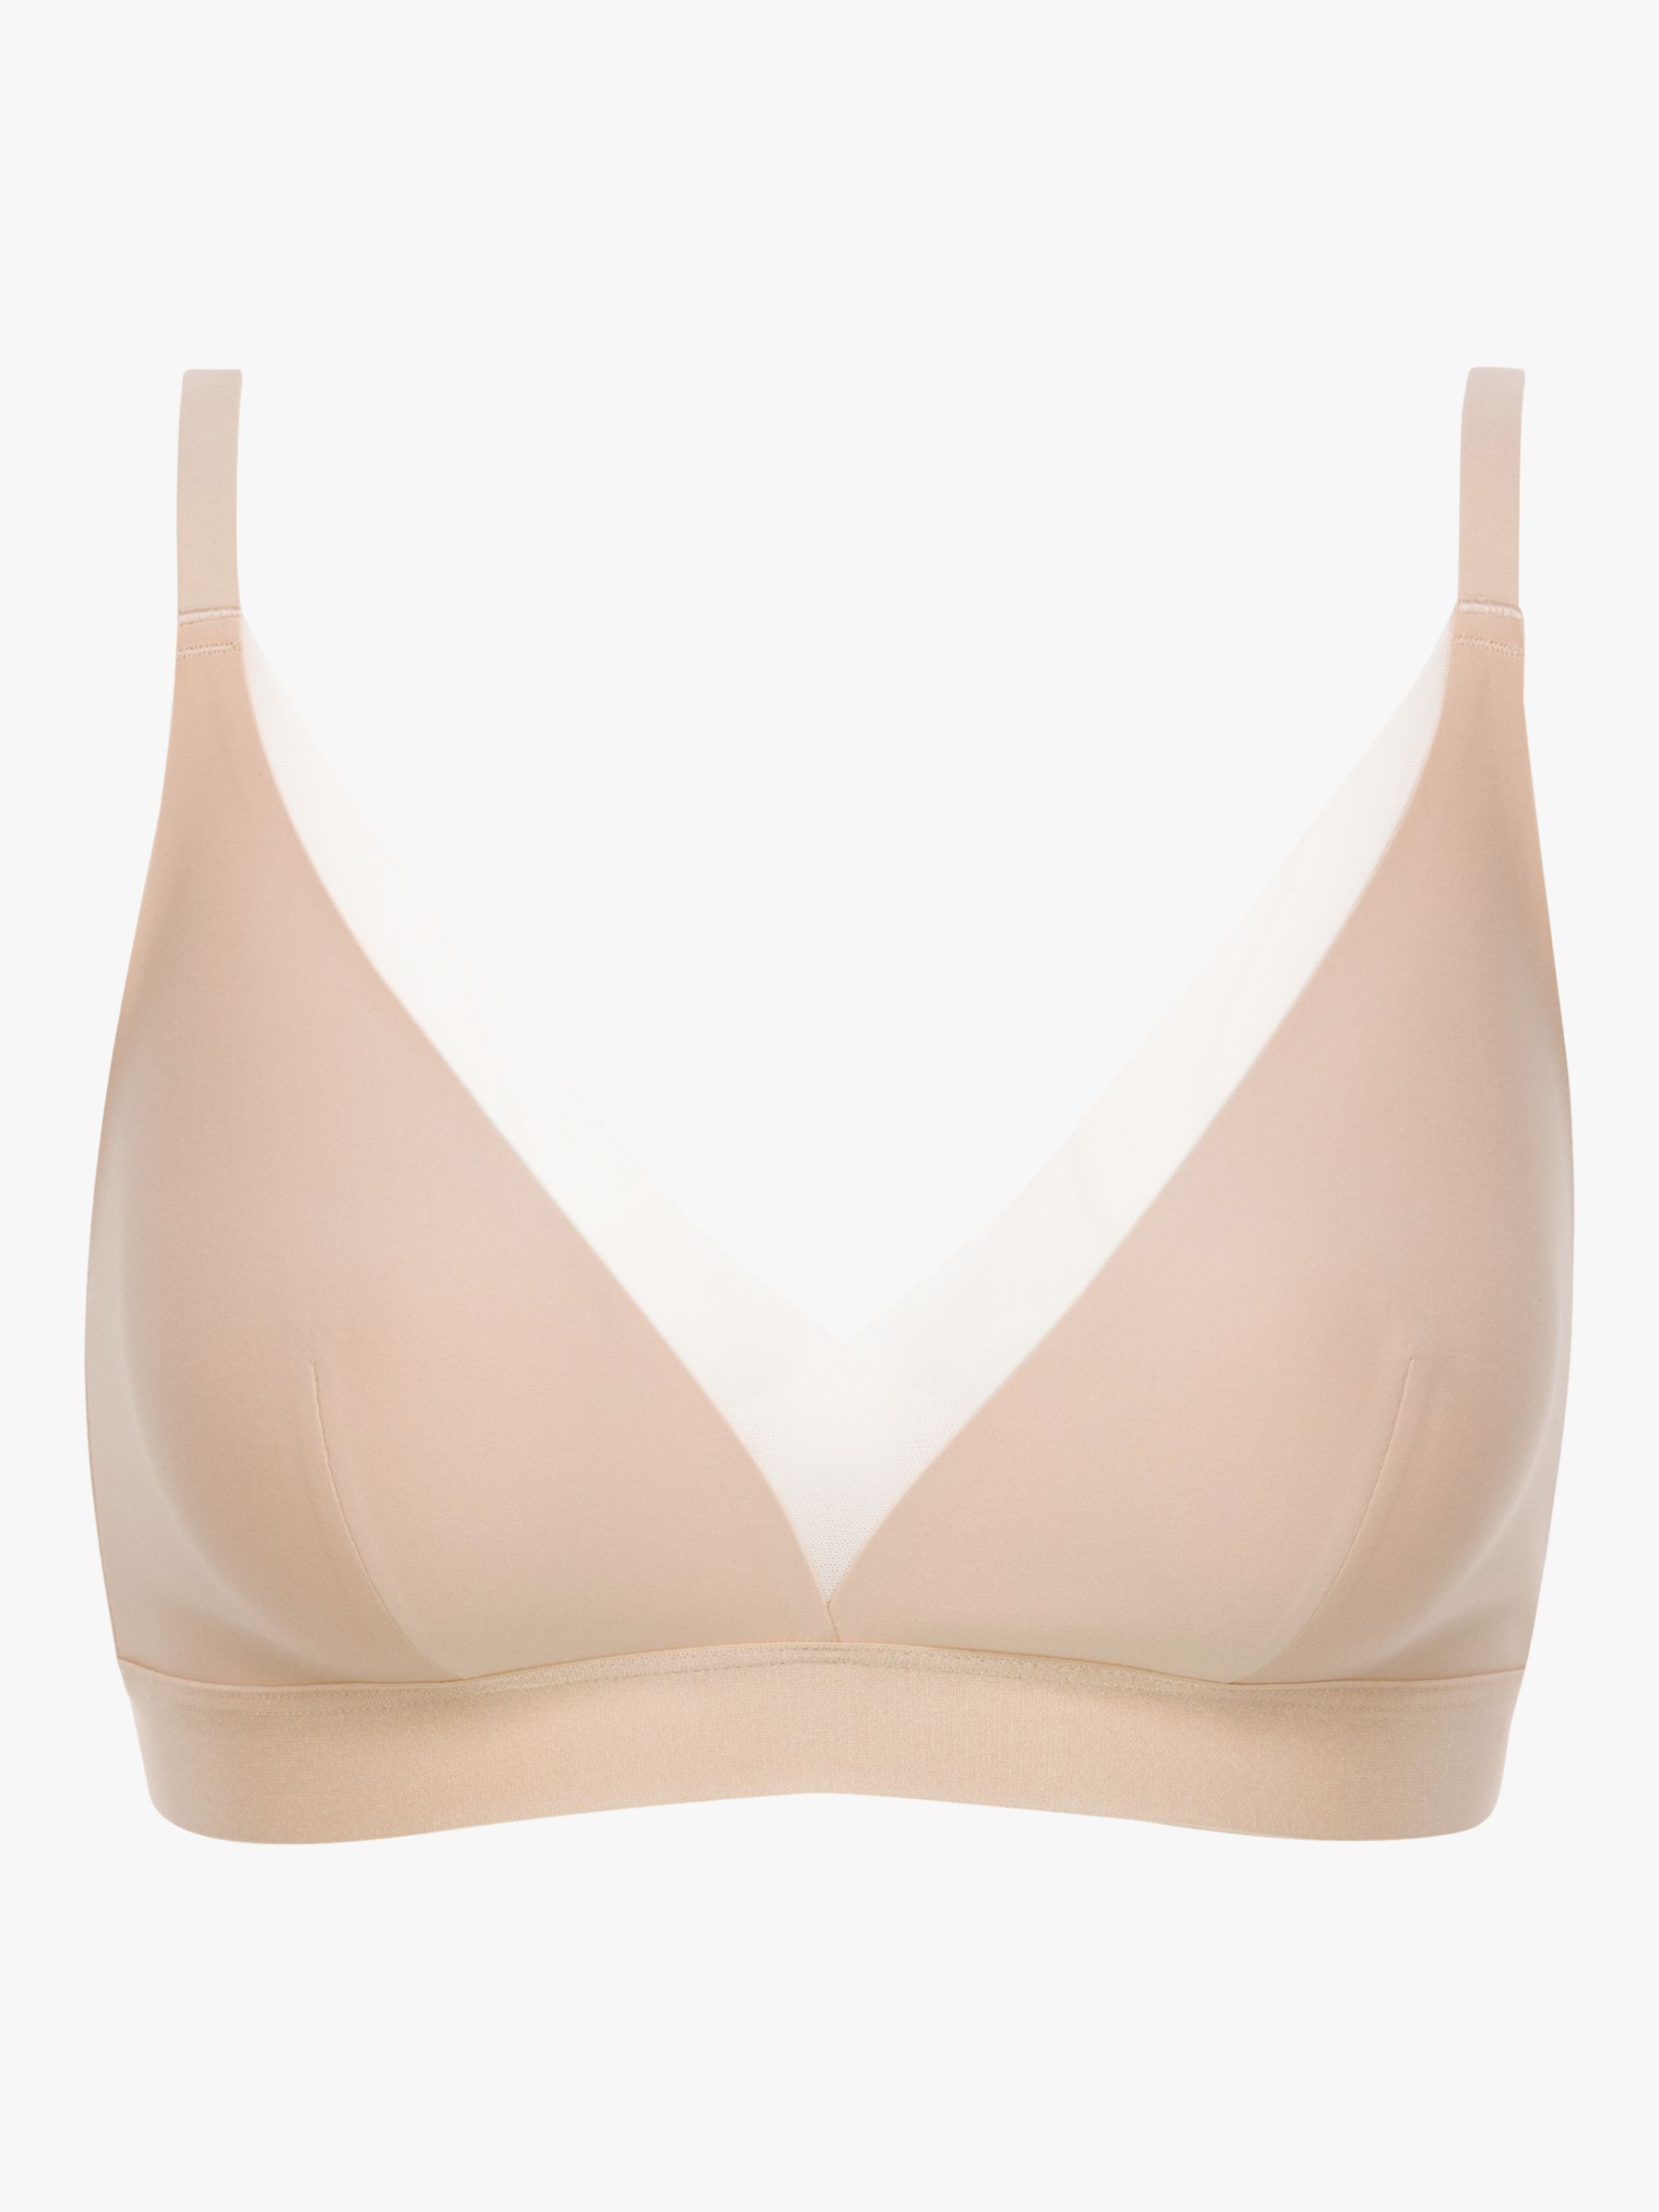 Chantelle Prime Non Wired Spacer Bra, Golden Beige at John Lewis & Partners